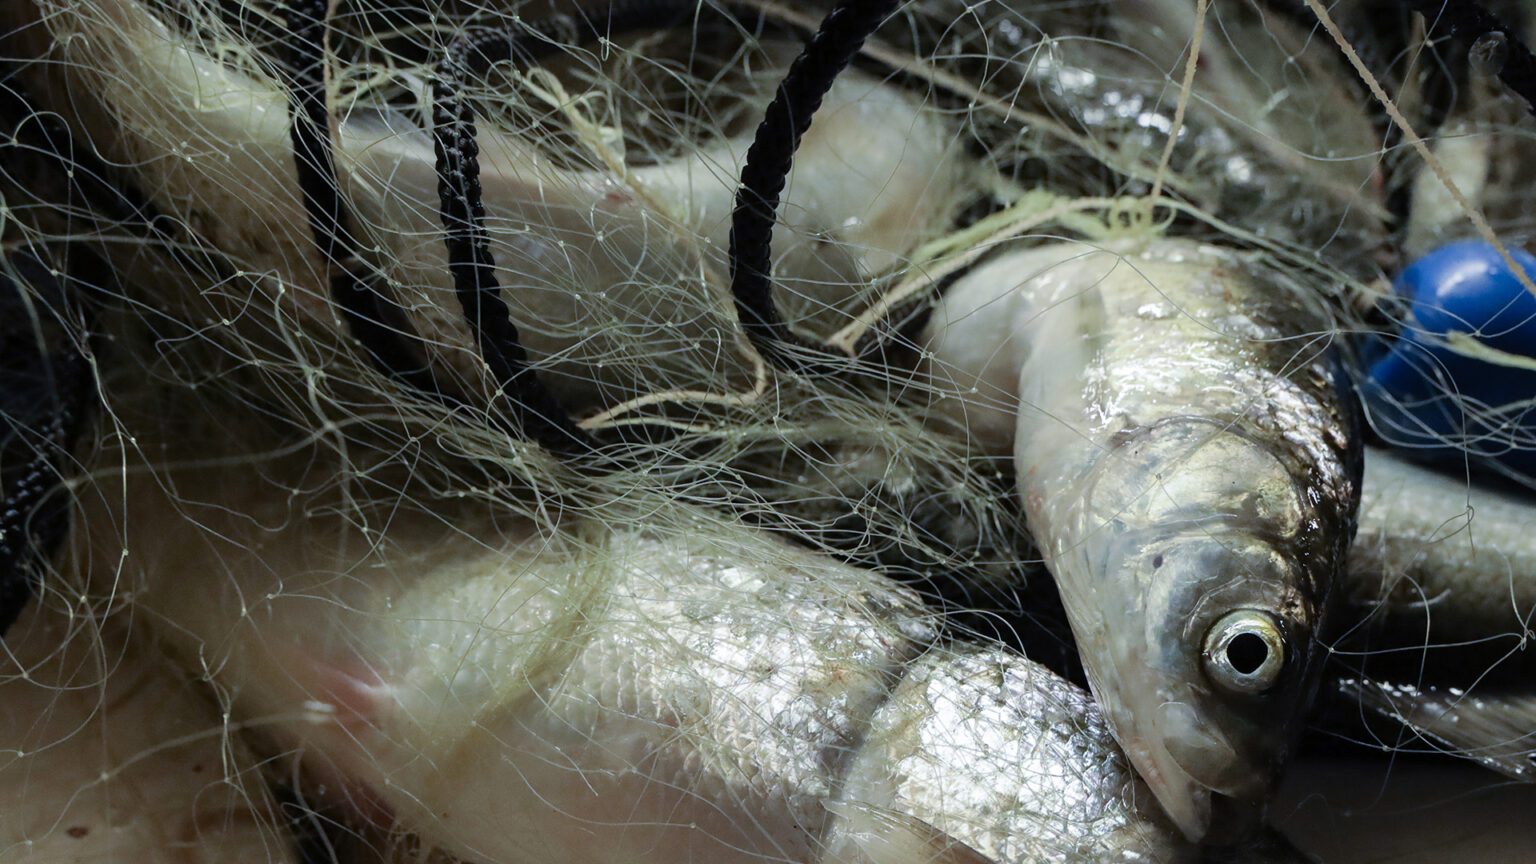 Multiple fish in a net sit atop a table.